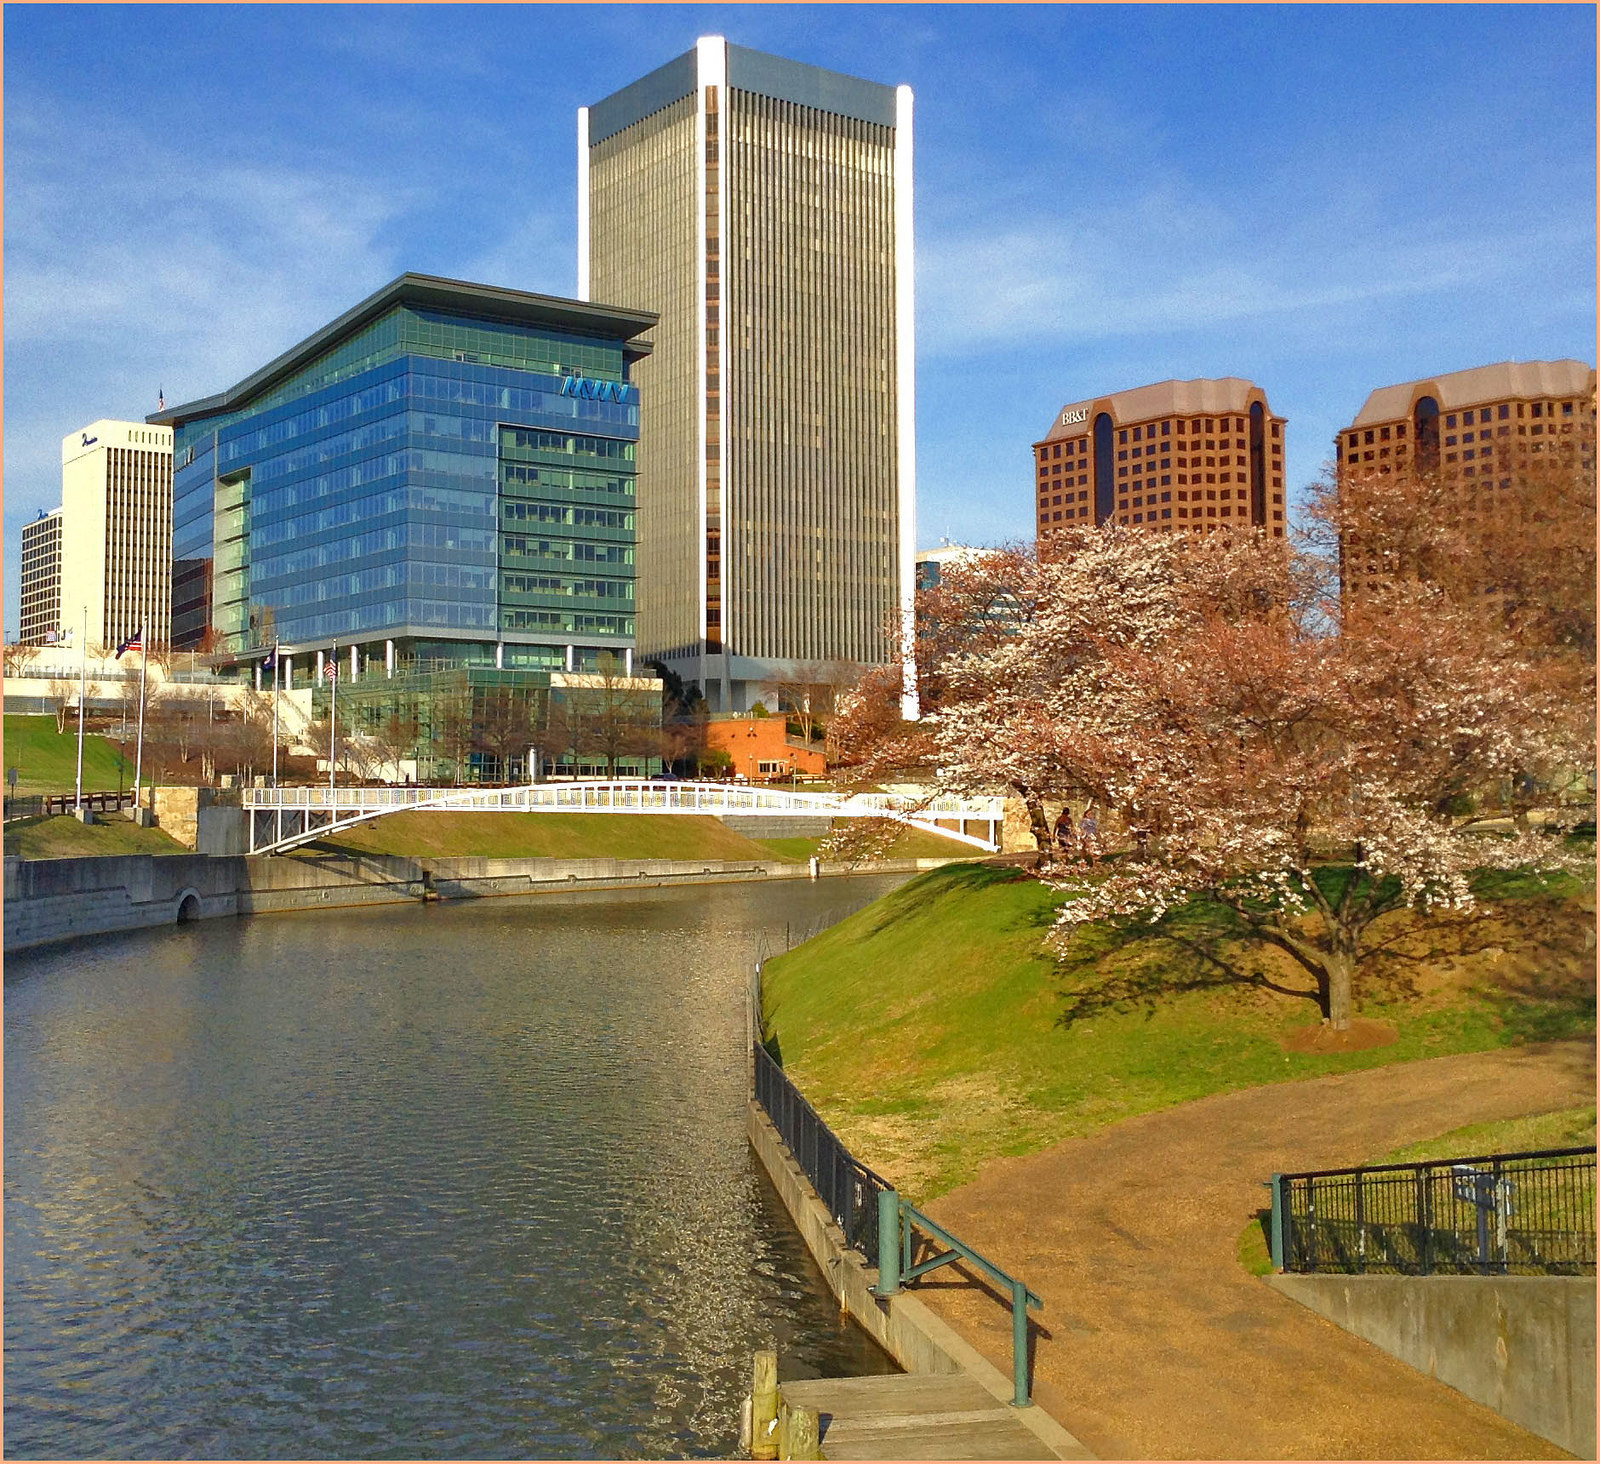 View of Downtown Richmond (VA) from Brown's Island April 2015 | ©Ron Cogswell/Flickr